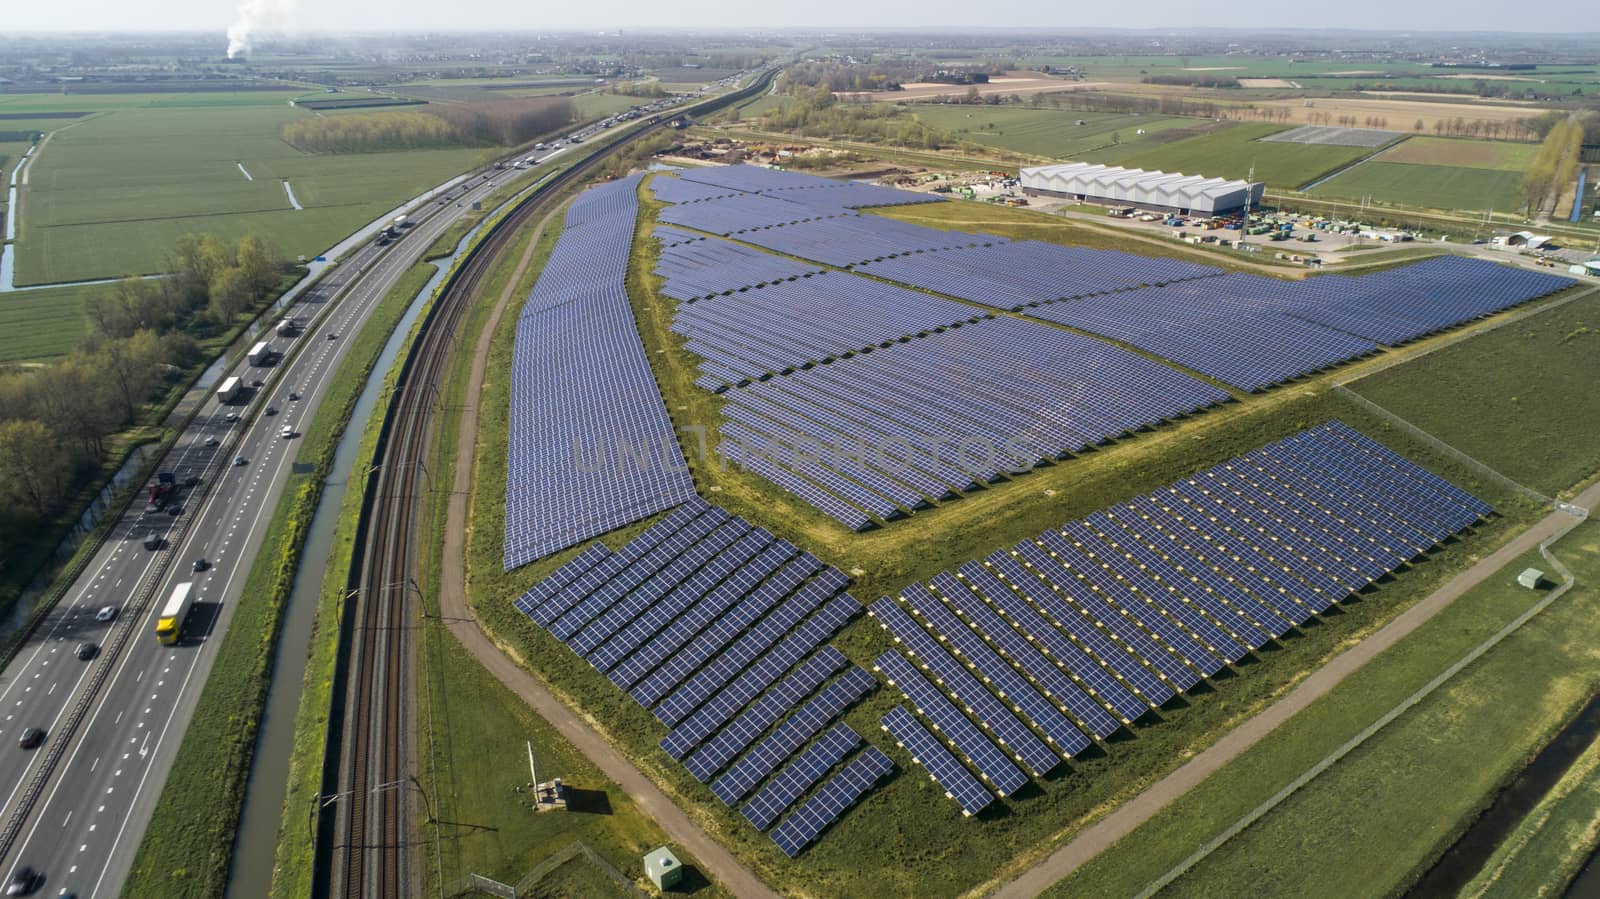 Big Solar panel farm with photovoltaic panels for clean solar energy